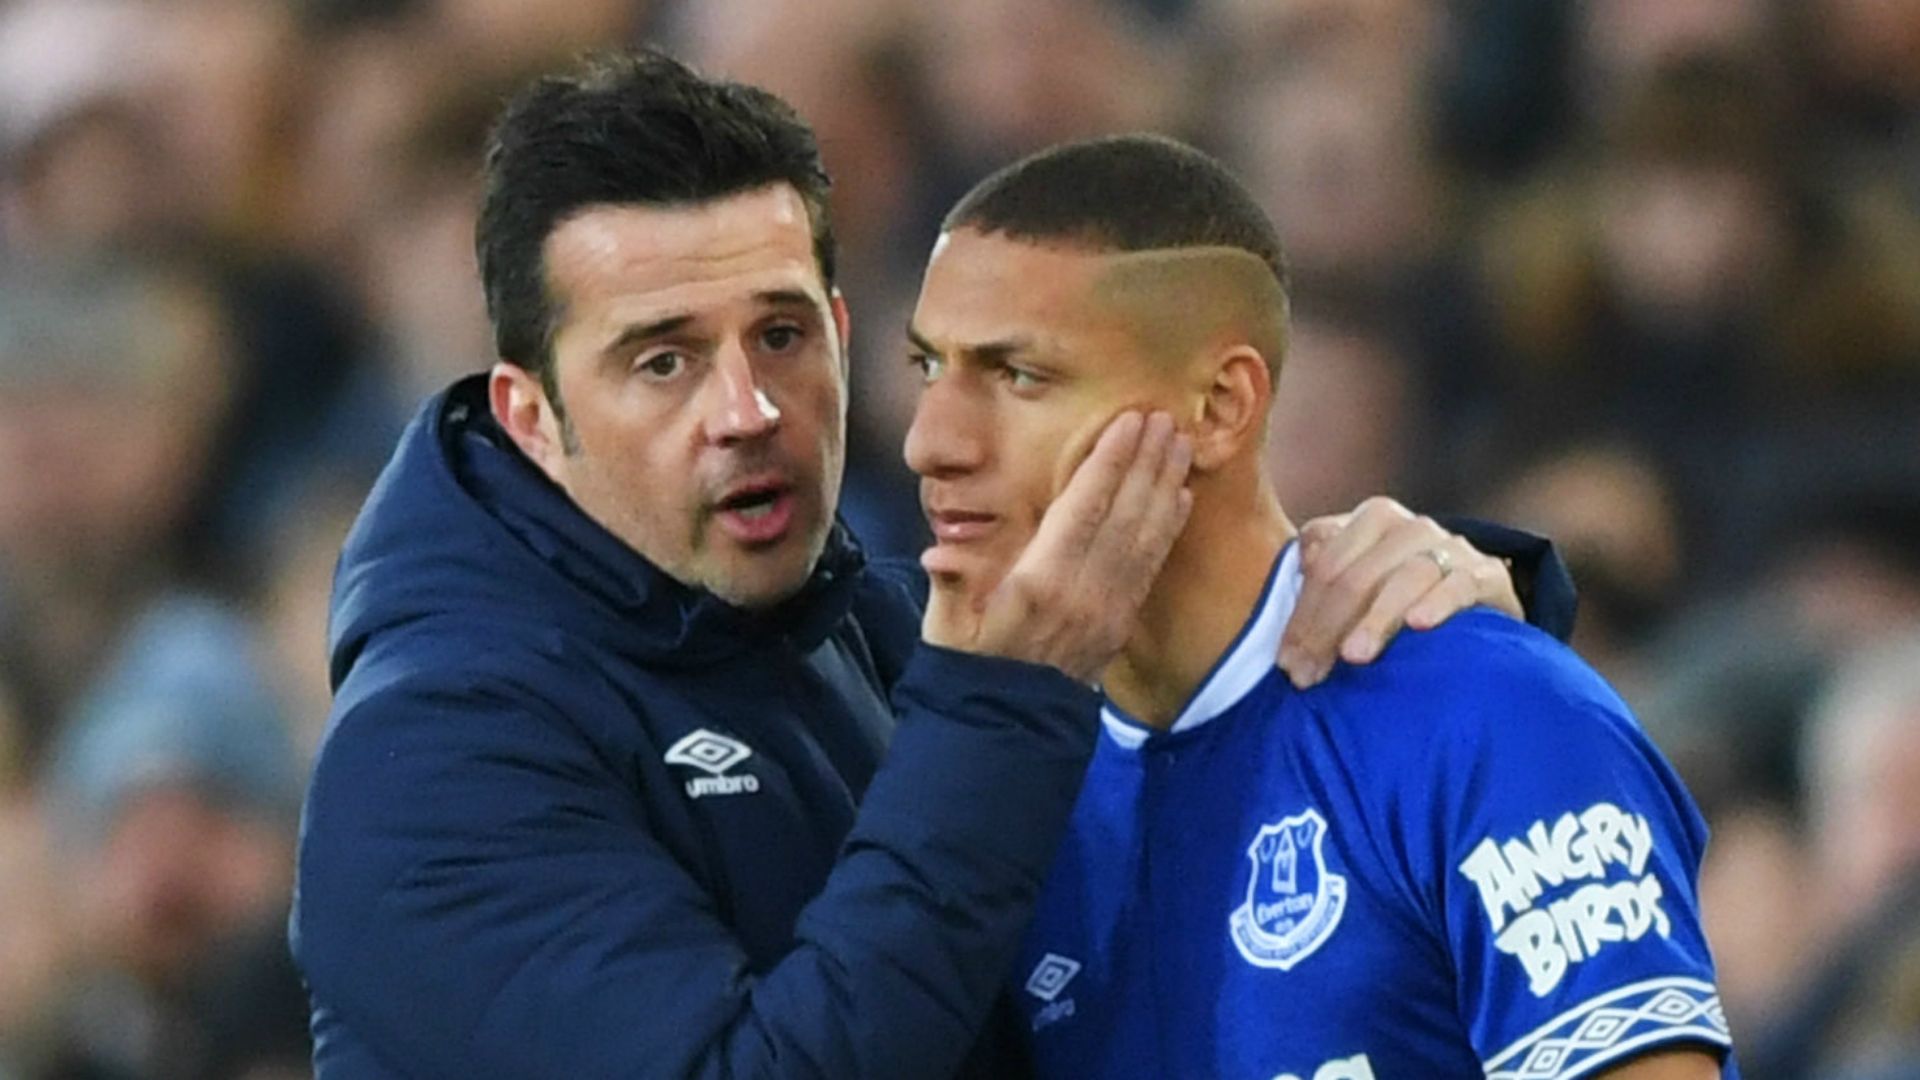 Marco Silva's guidance on the training field has been "essential" to Richarlison's form this season, according to the Brazilian forward.